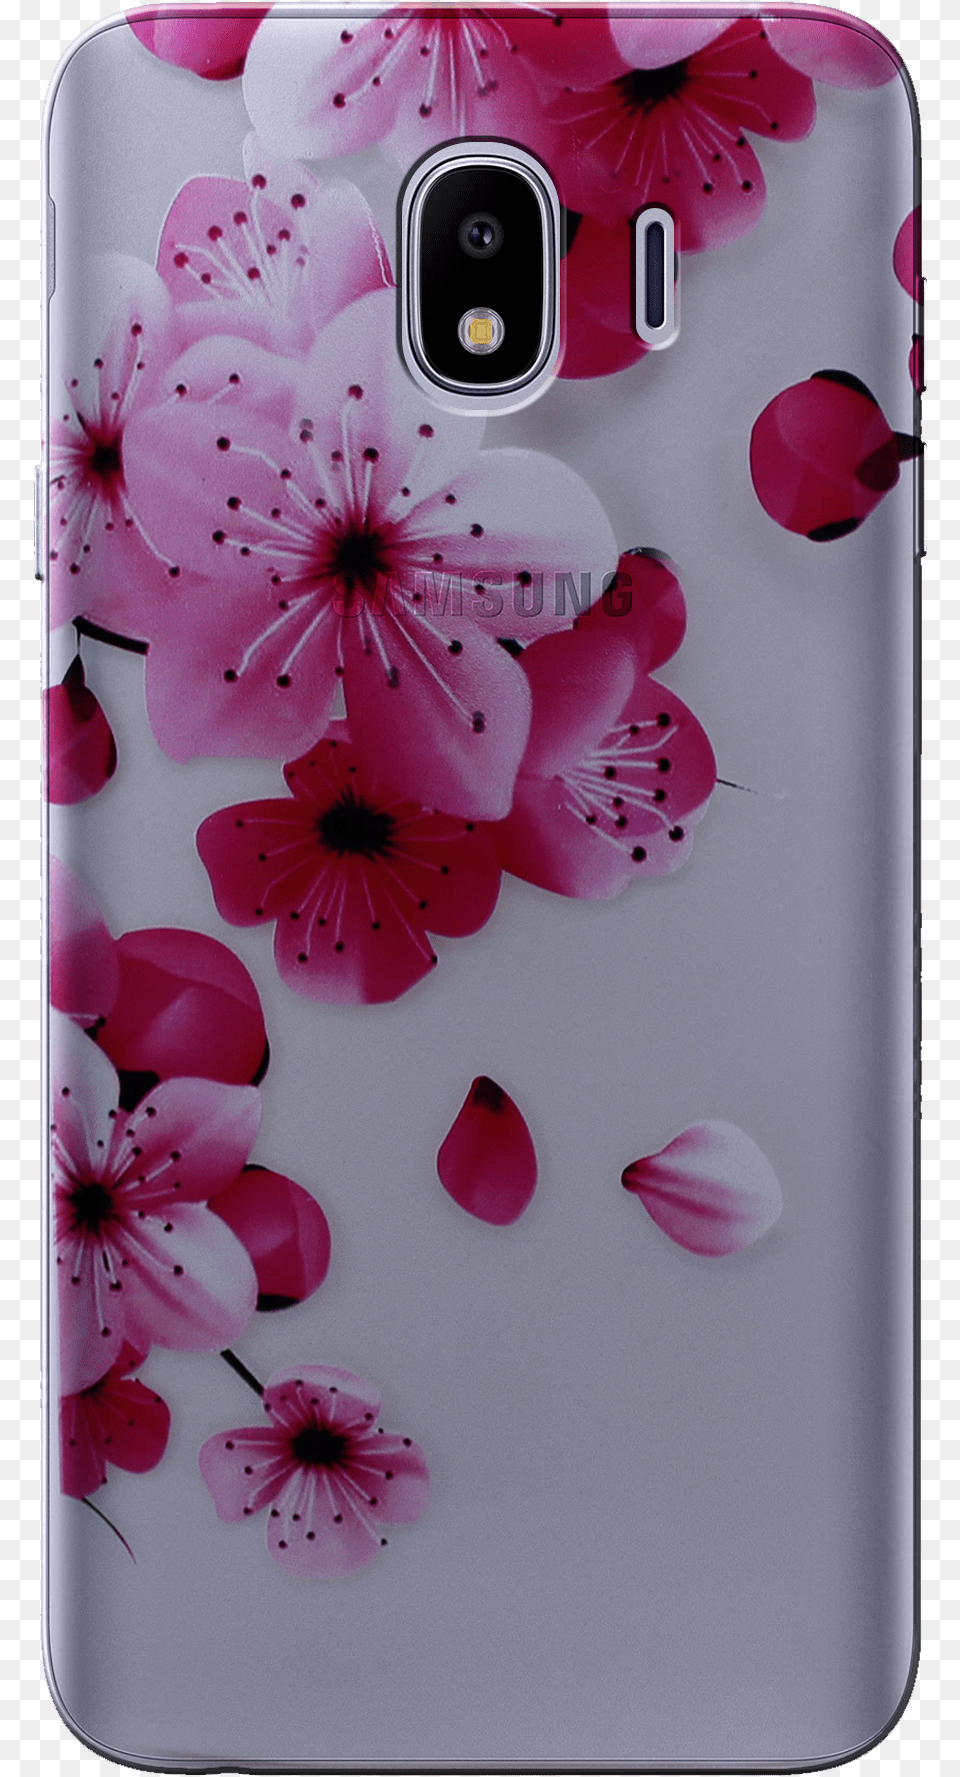 Smartphone, Electronics, Mobile Phone, Phone, Flower Png